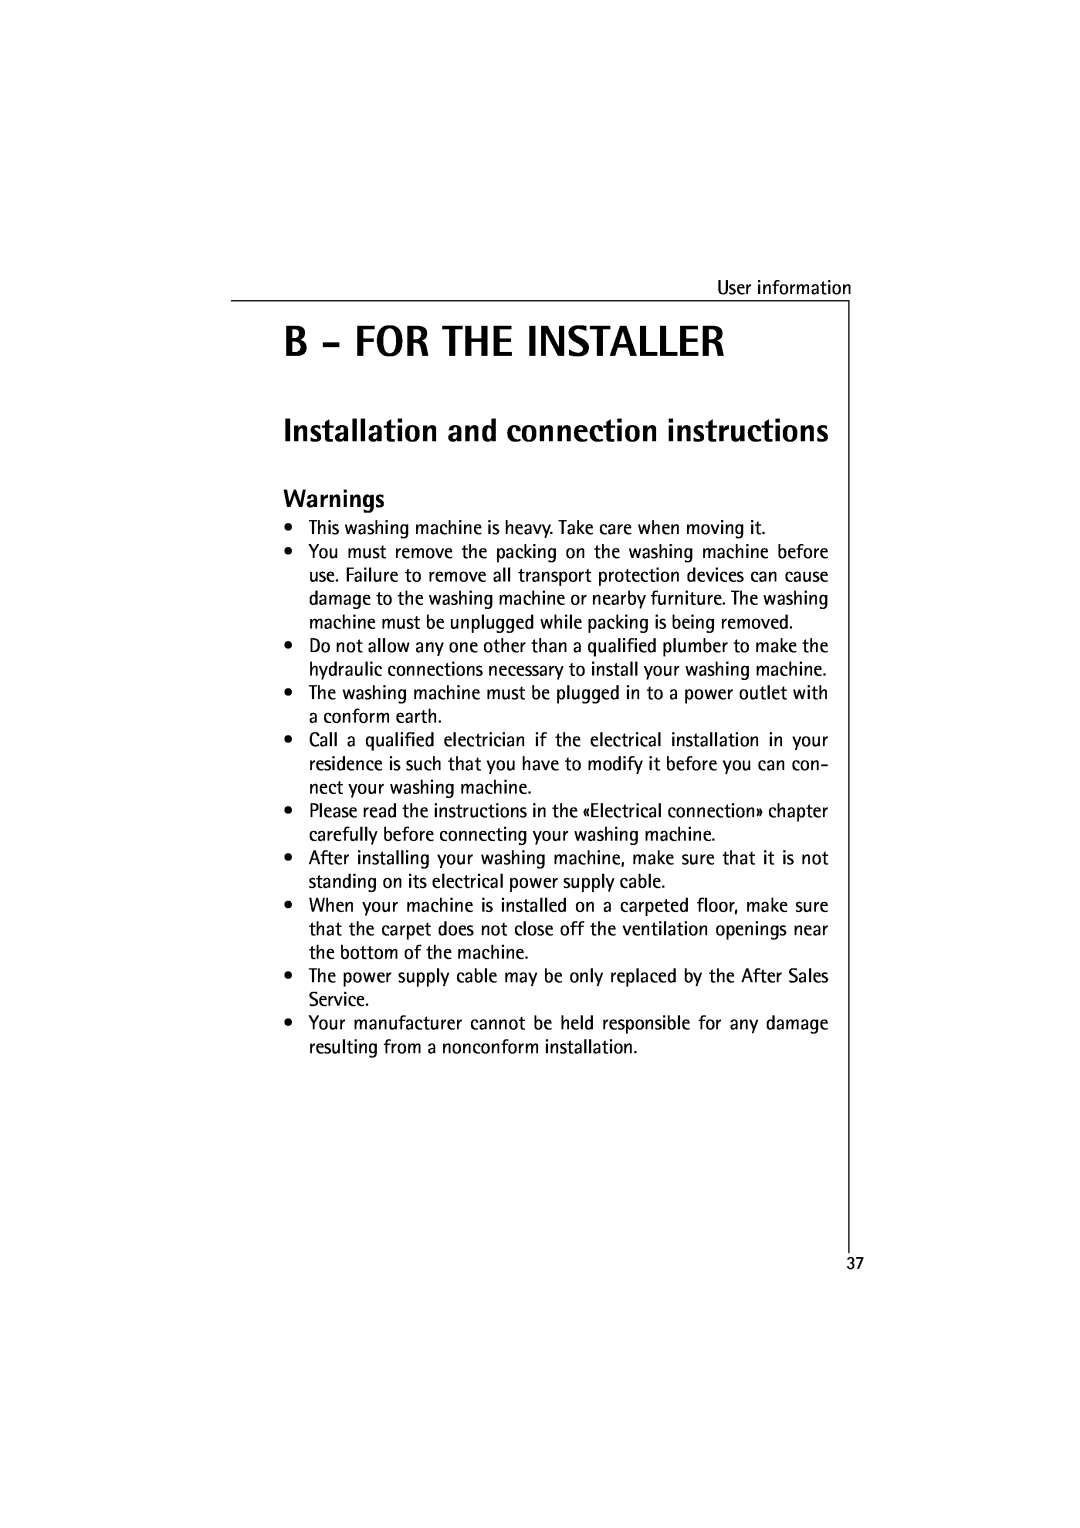 AEG 48380 manual B - For The Installer, Installation and connection instructions, Warnings 